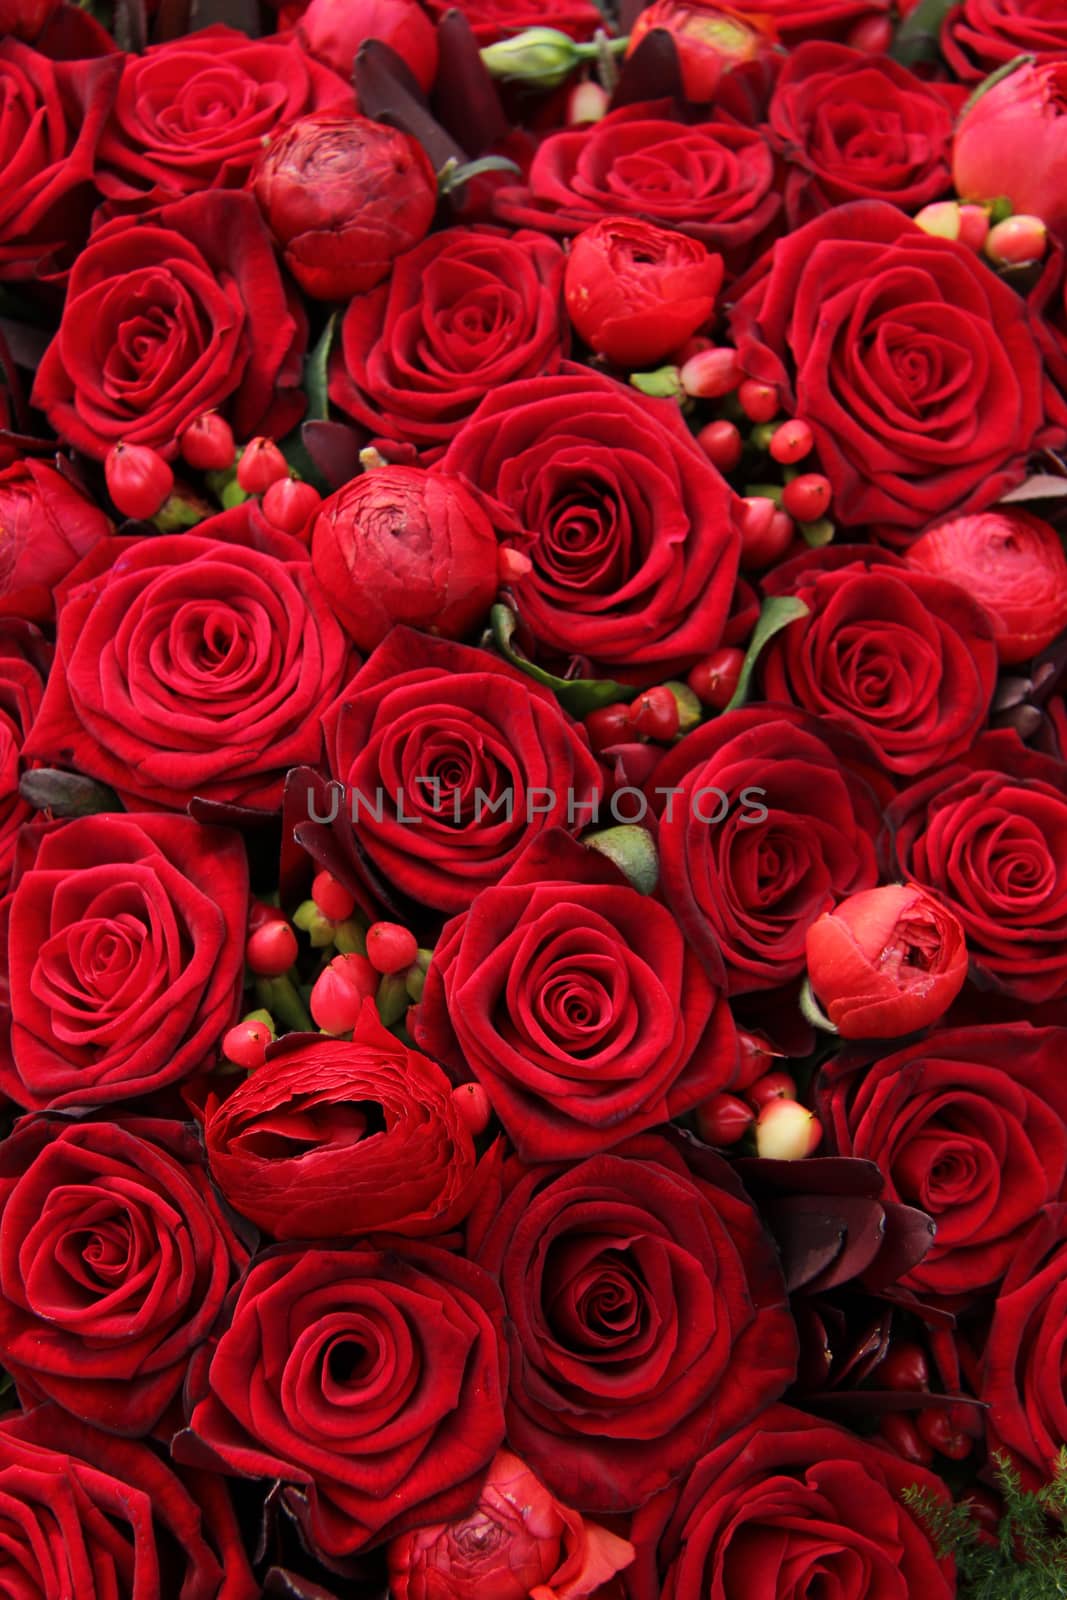 Red ranunculus, berries and roses in a group